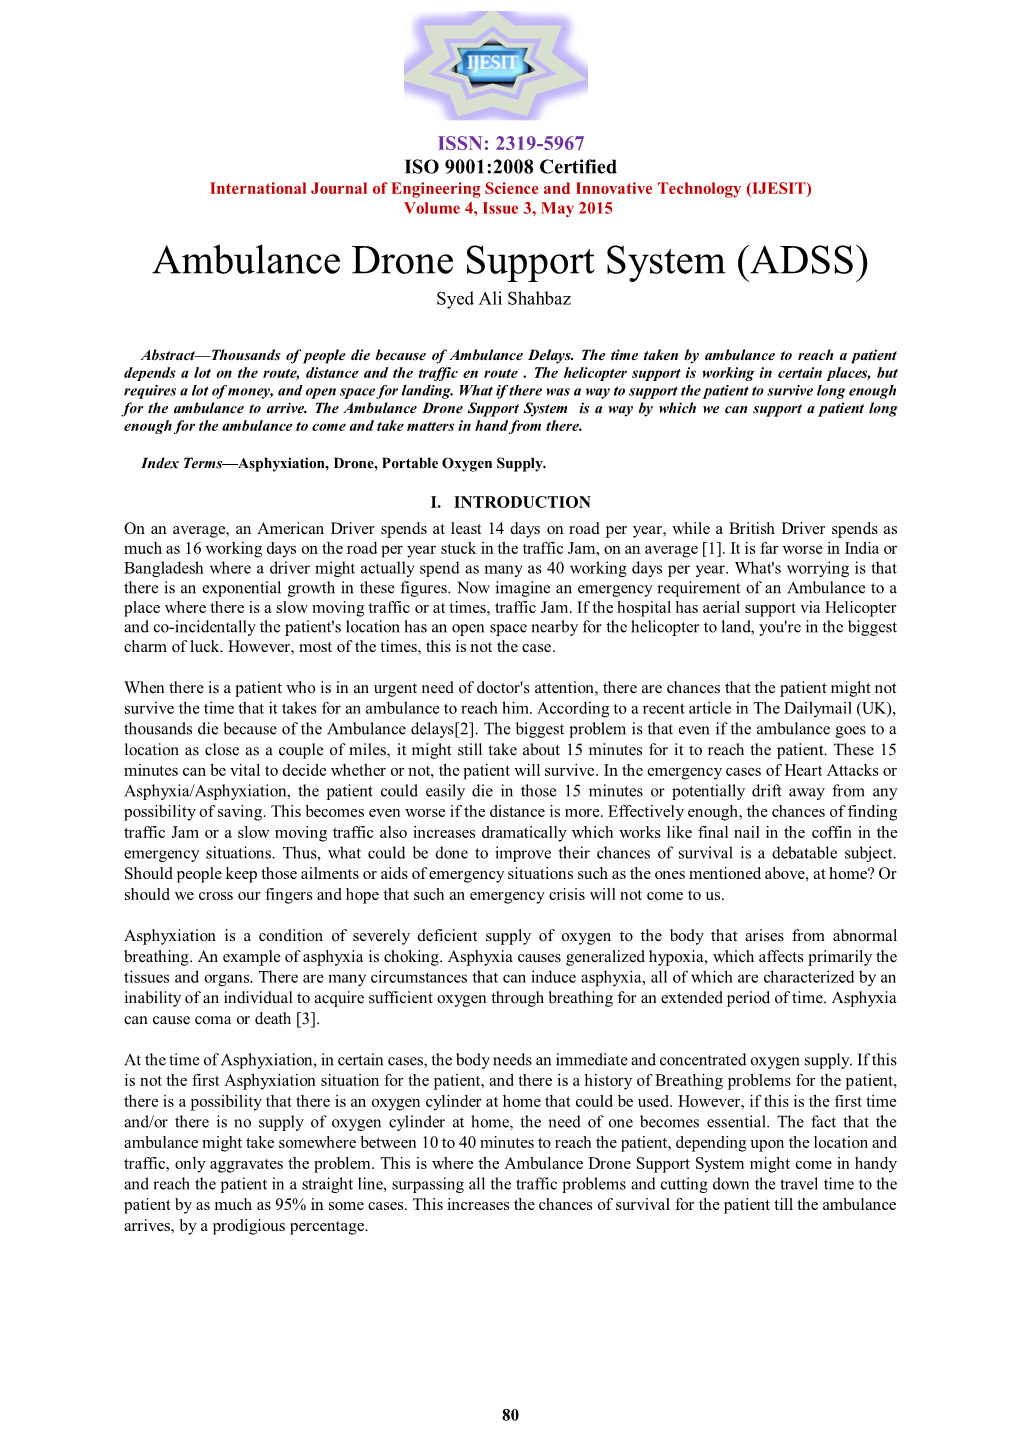 Ambulance Drone Support System (ADSS) Syed Ali Shahbaz